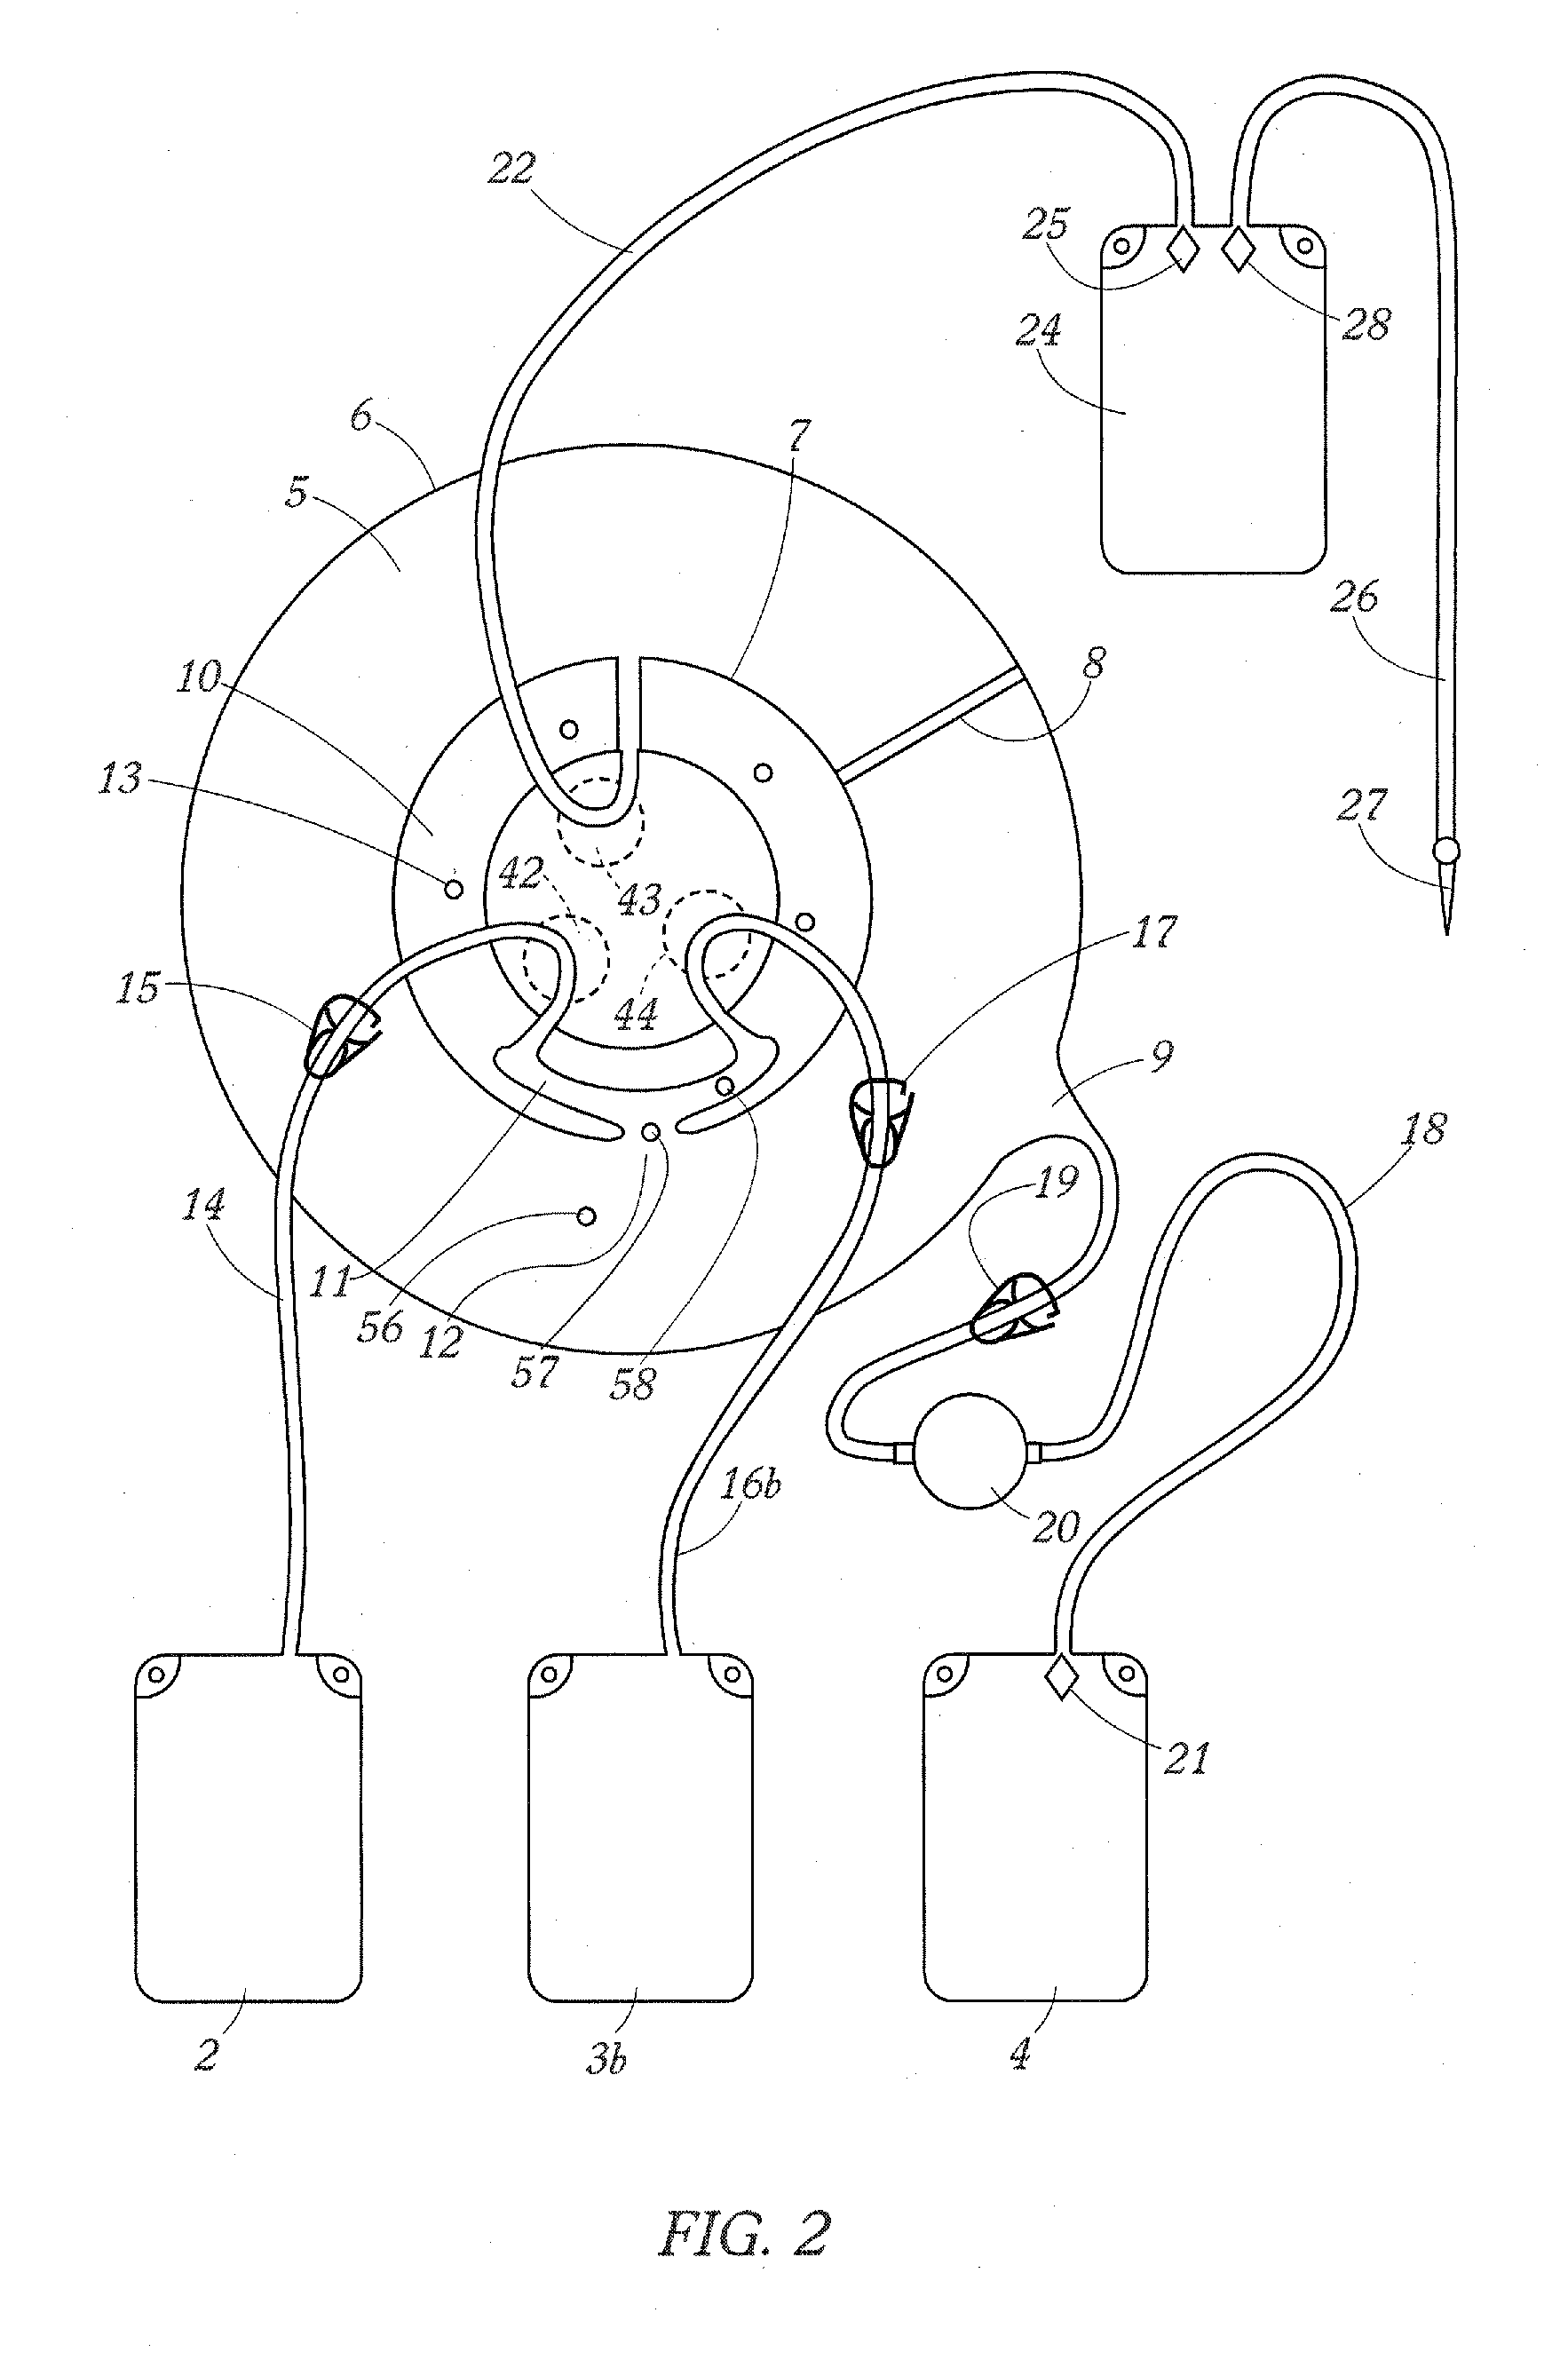 Apparatus and Method for Separating a Volume of Whole Blood Into At Least Three Components